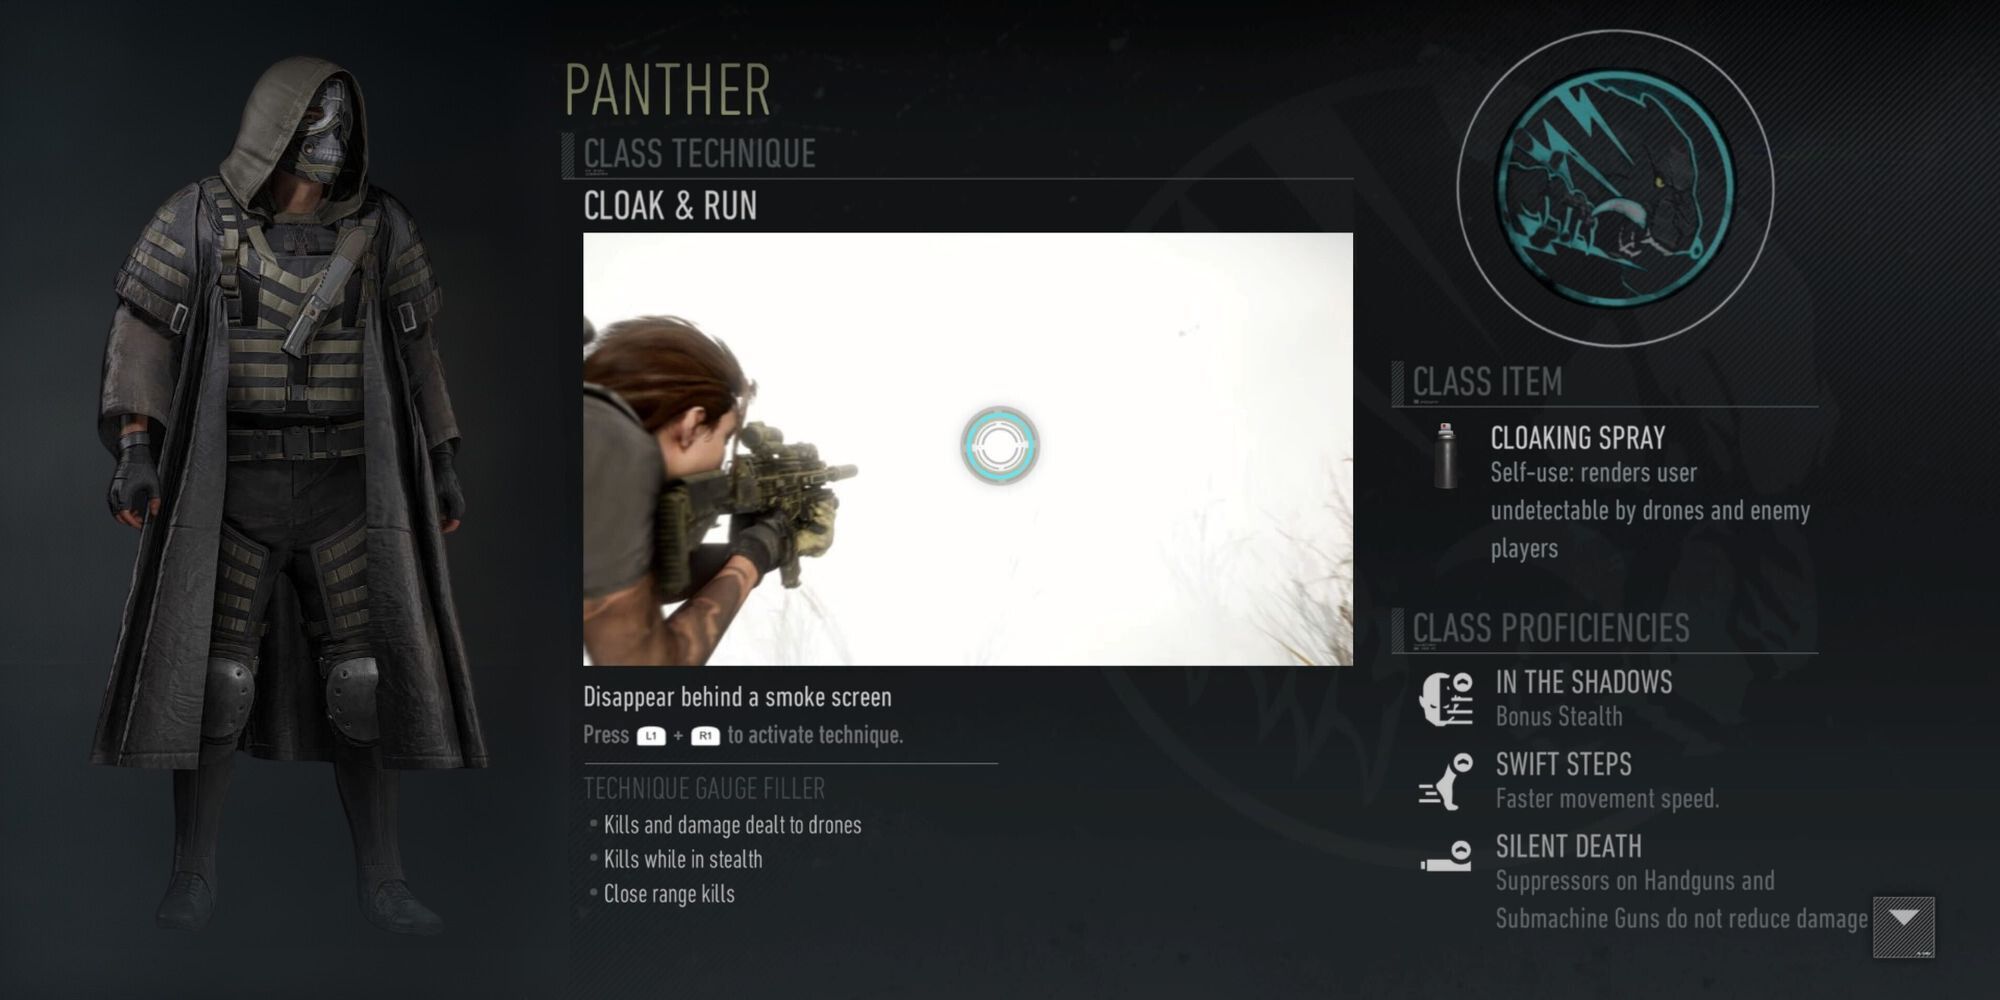 The Panther class from Ghost Recon Breakpoint accompanied by a soldier and the clas logo